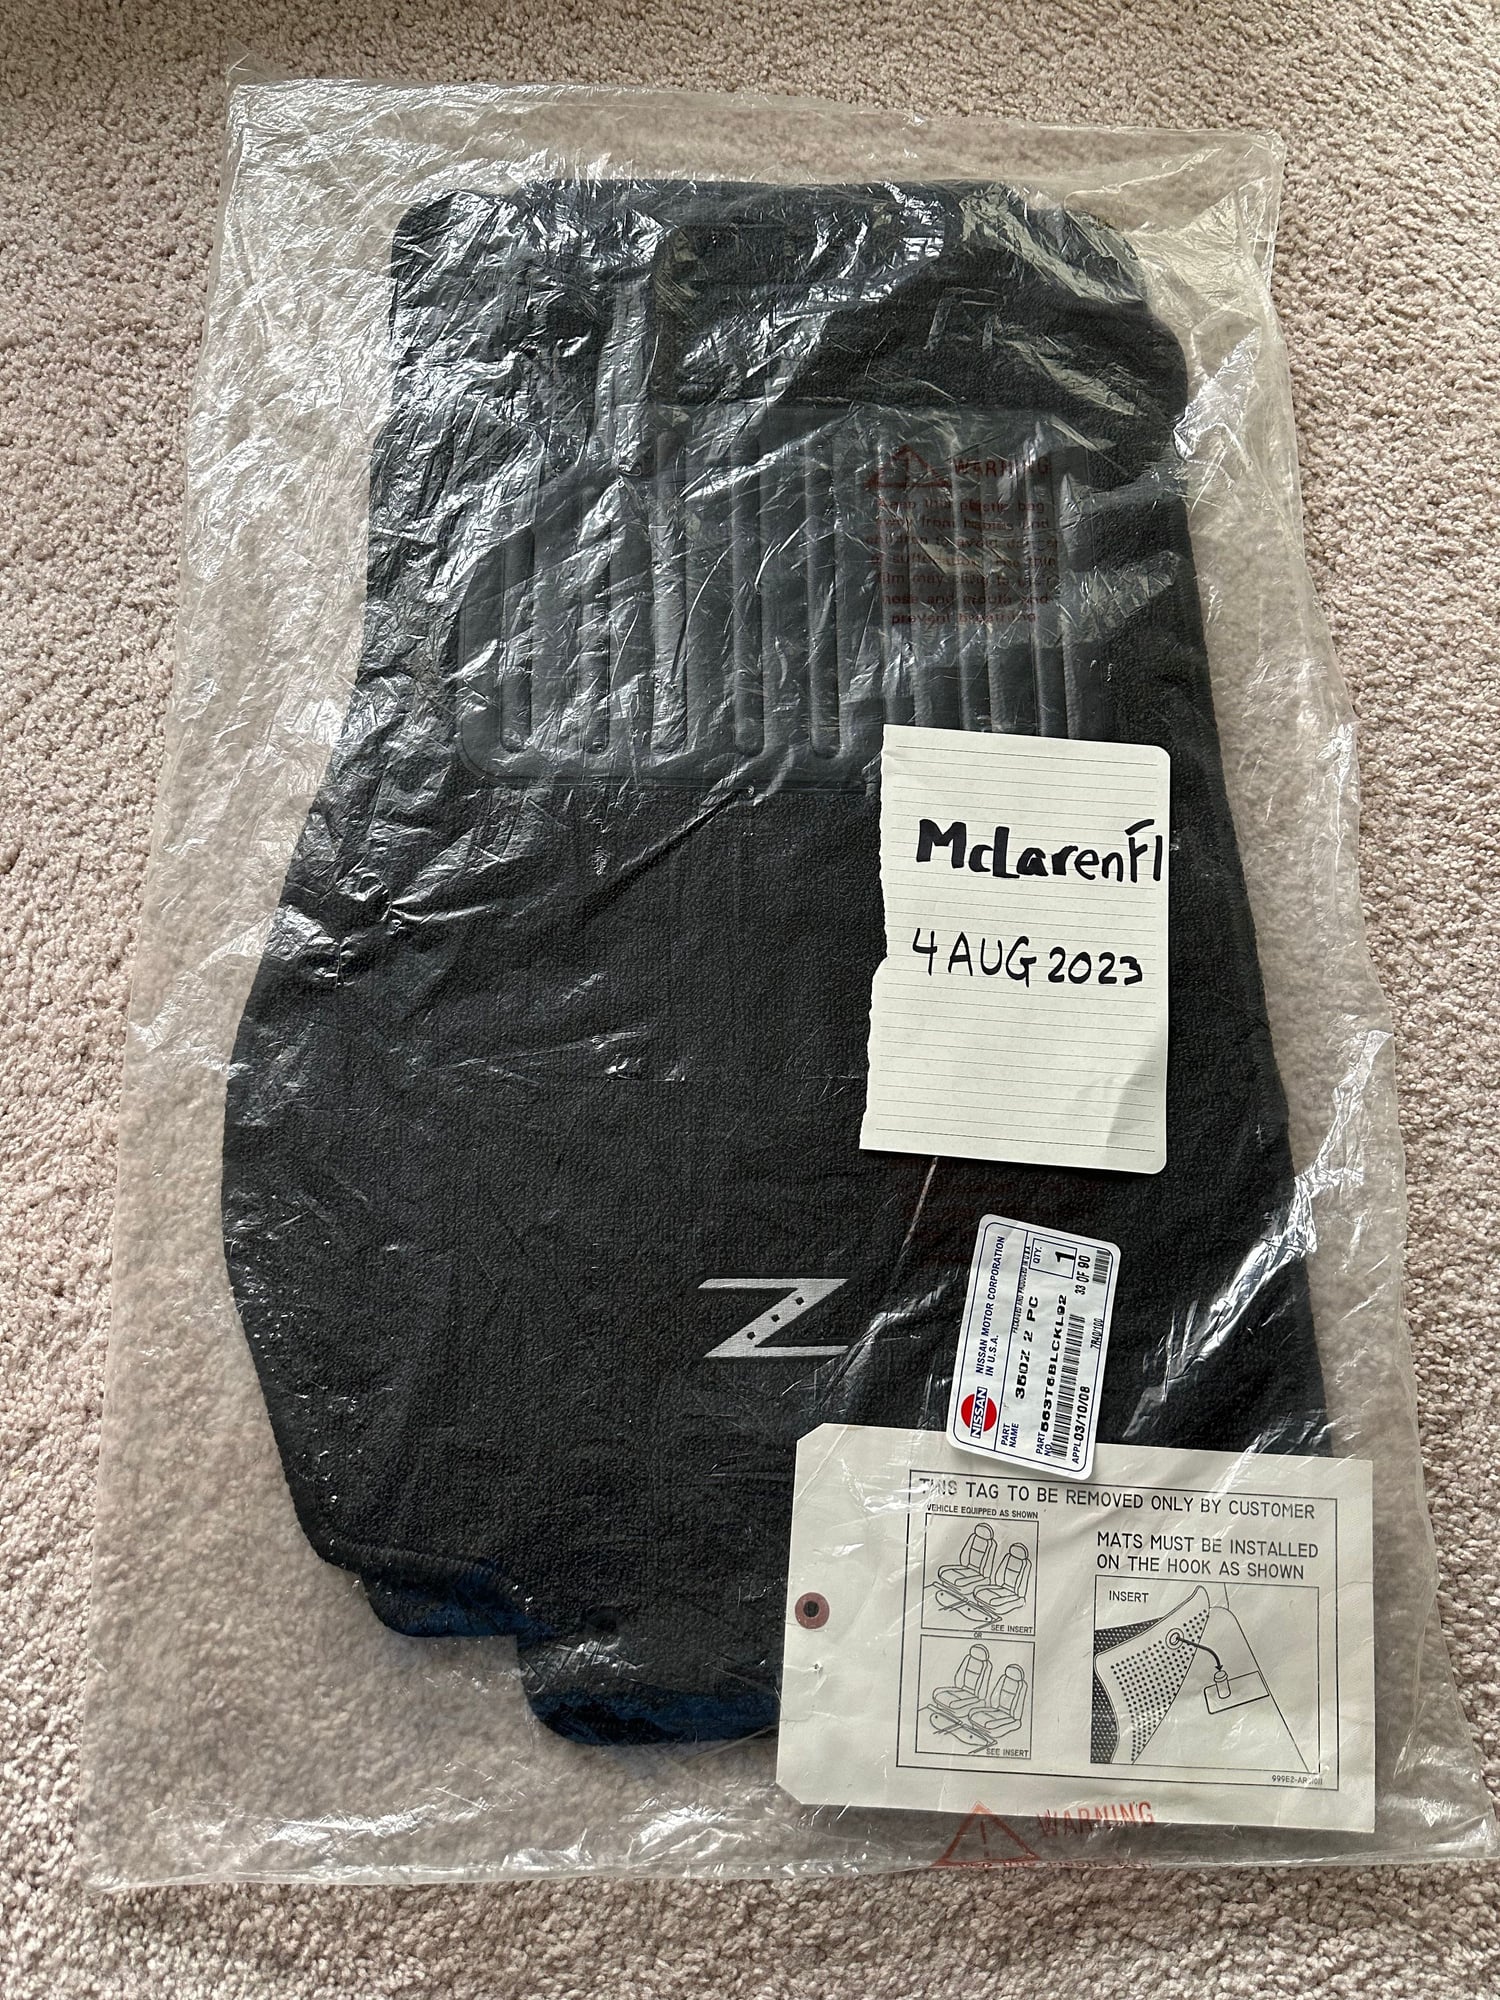 Accessories - OEM Nissan 350Z floor mats - New - 2003 to 2008 Nissan 350Z - Waltham, MA 02452, United States